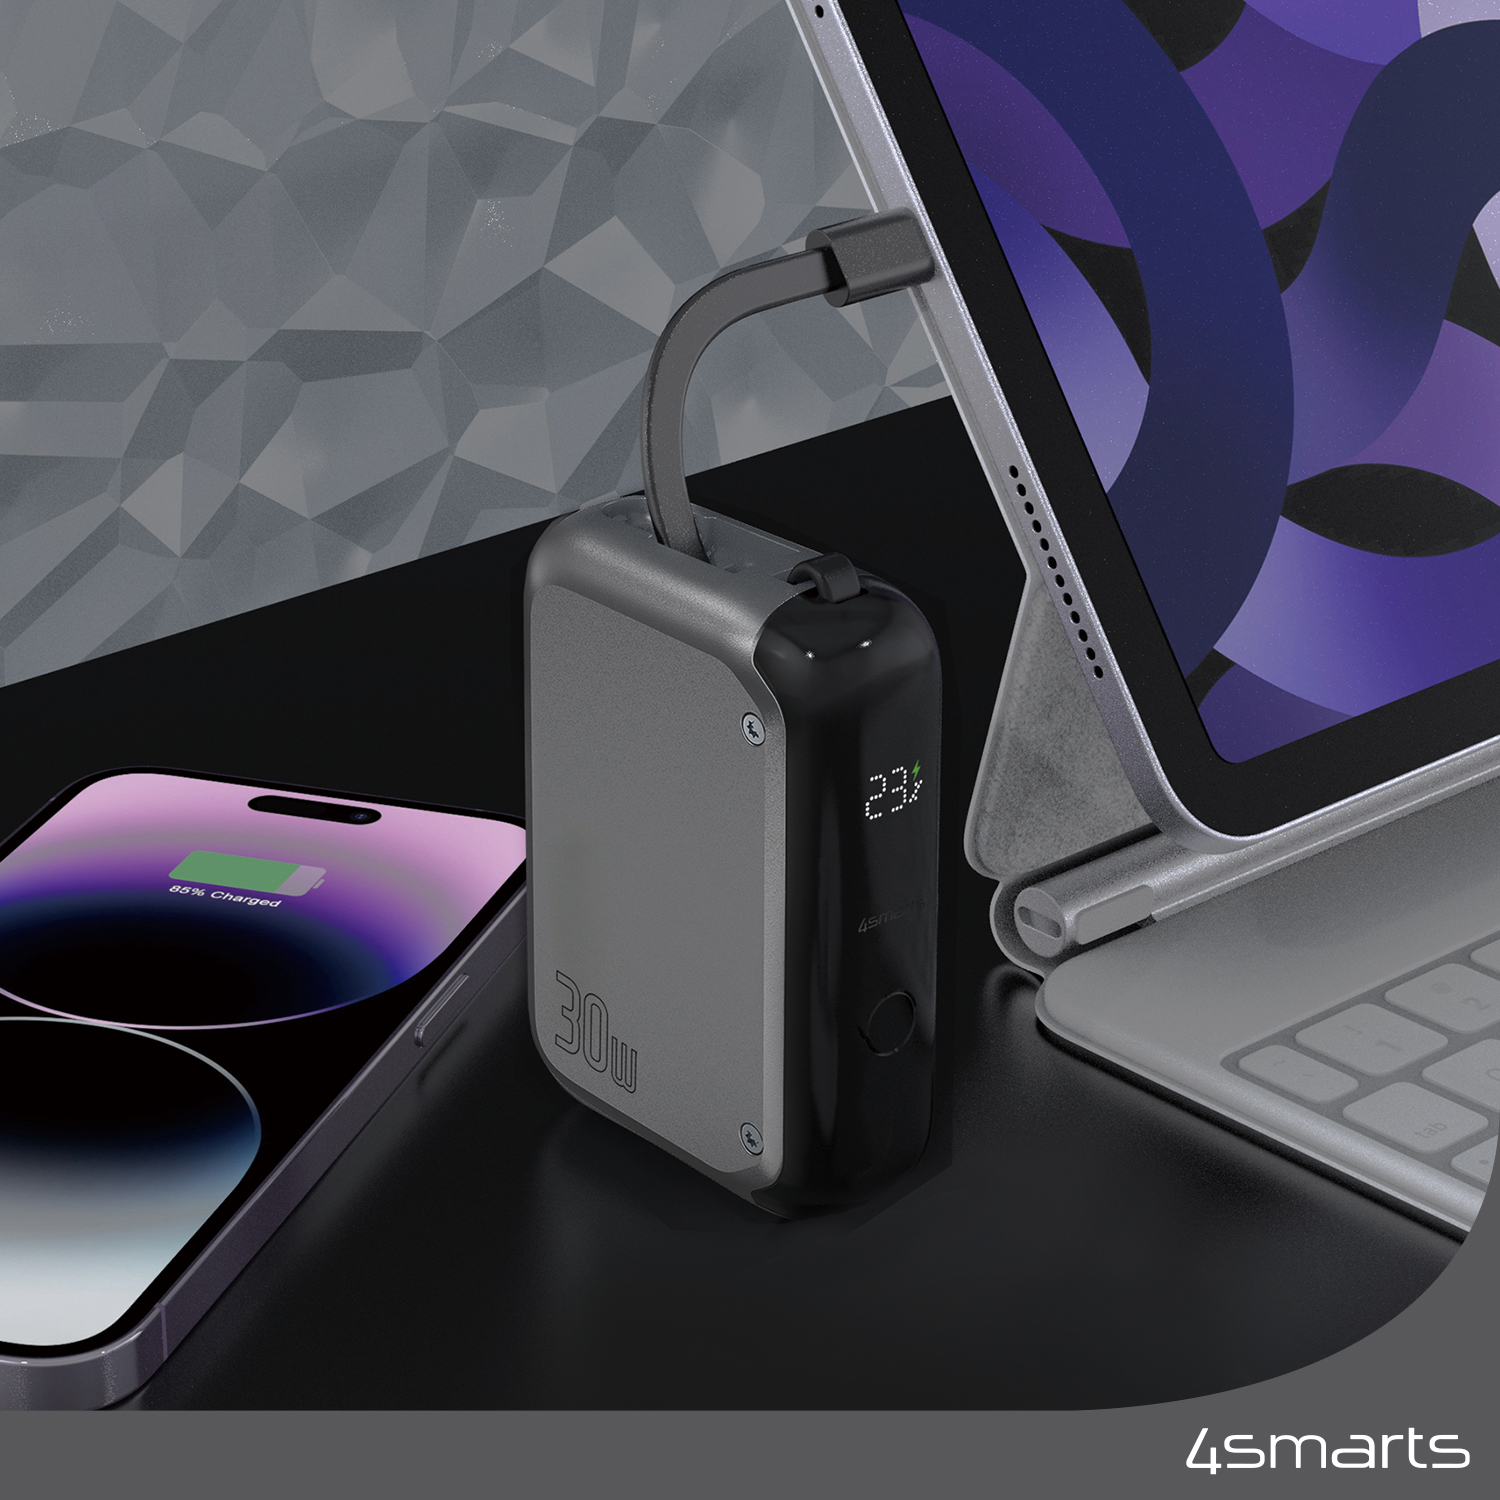 With a charging capacity of 10,000mAh, the 4smarts Powerbank Pocket is a practical solution for travelling and comes with a built-in USB-C cable.